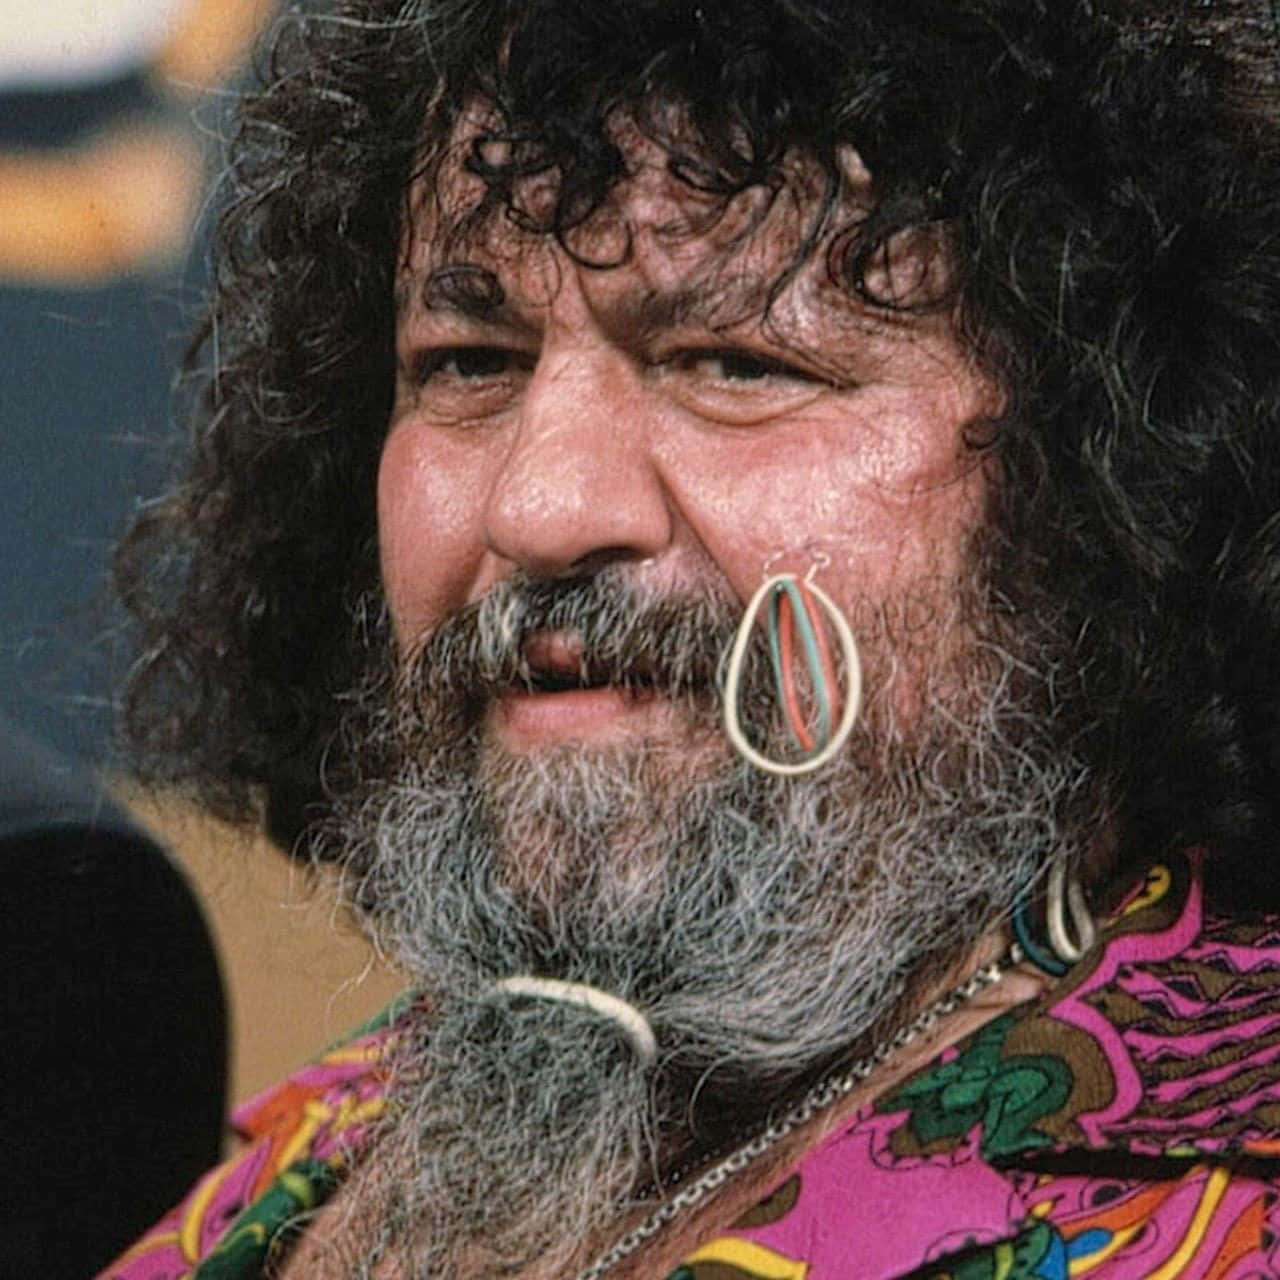 Lou Albano With Rubber Bands On His Cheek Wallpaper